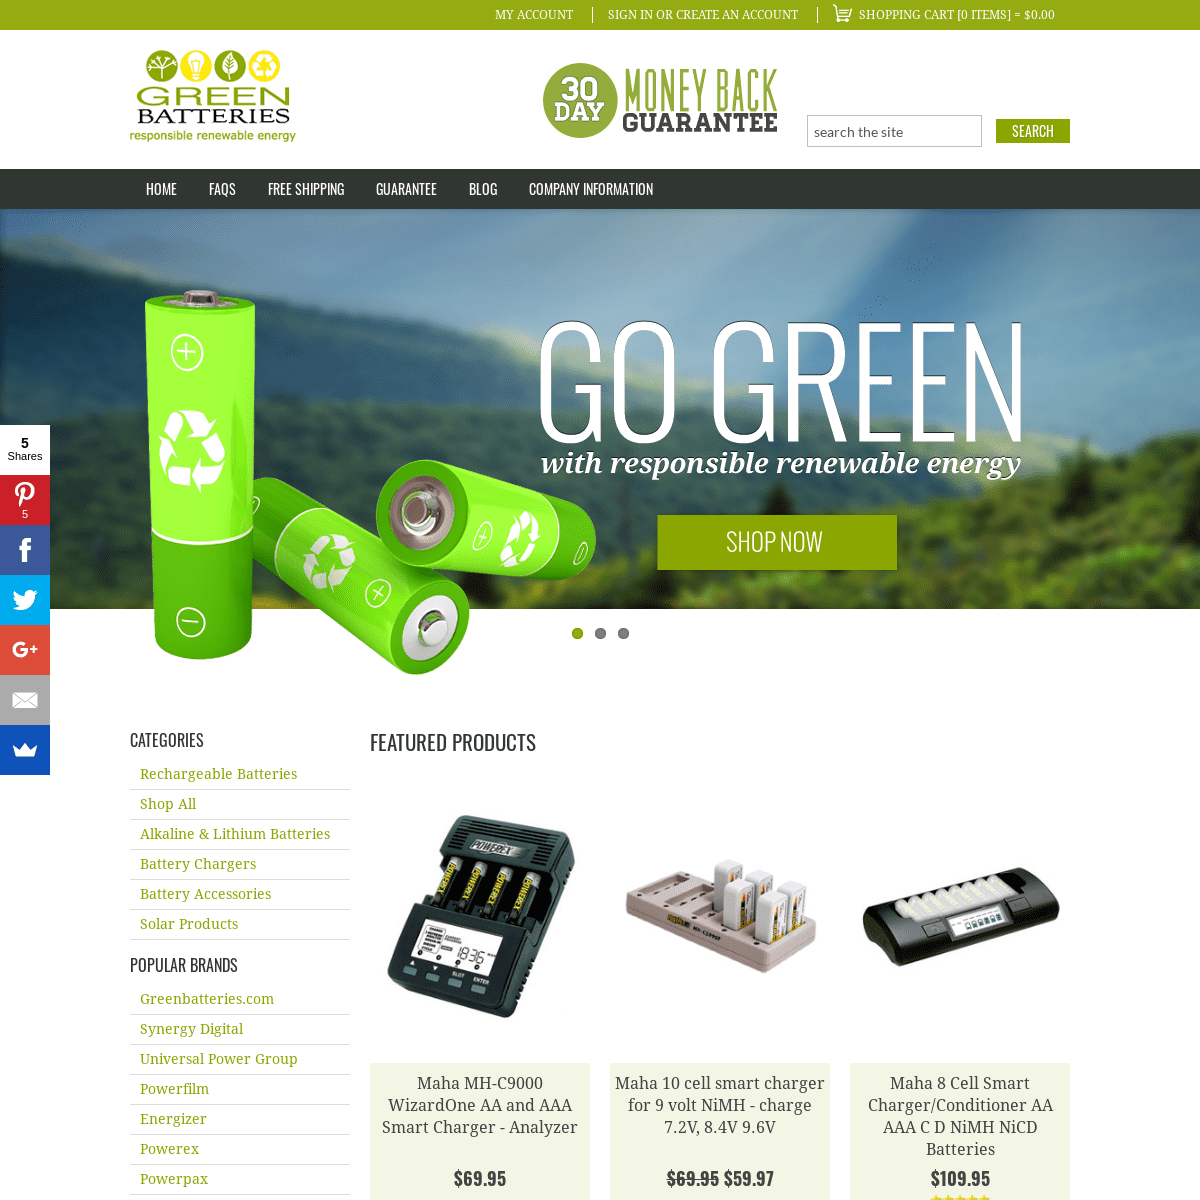 A complete backup of greenbatteries.com